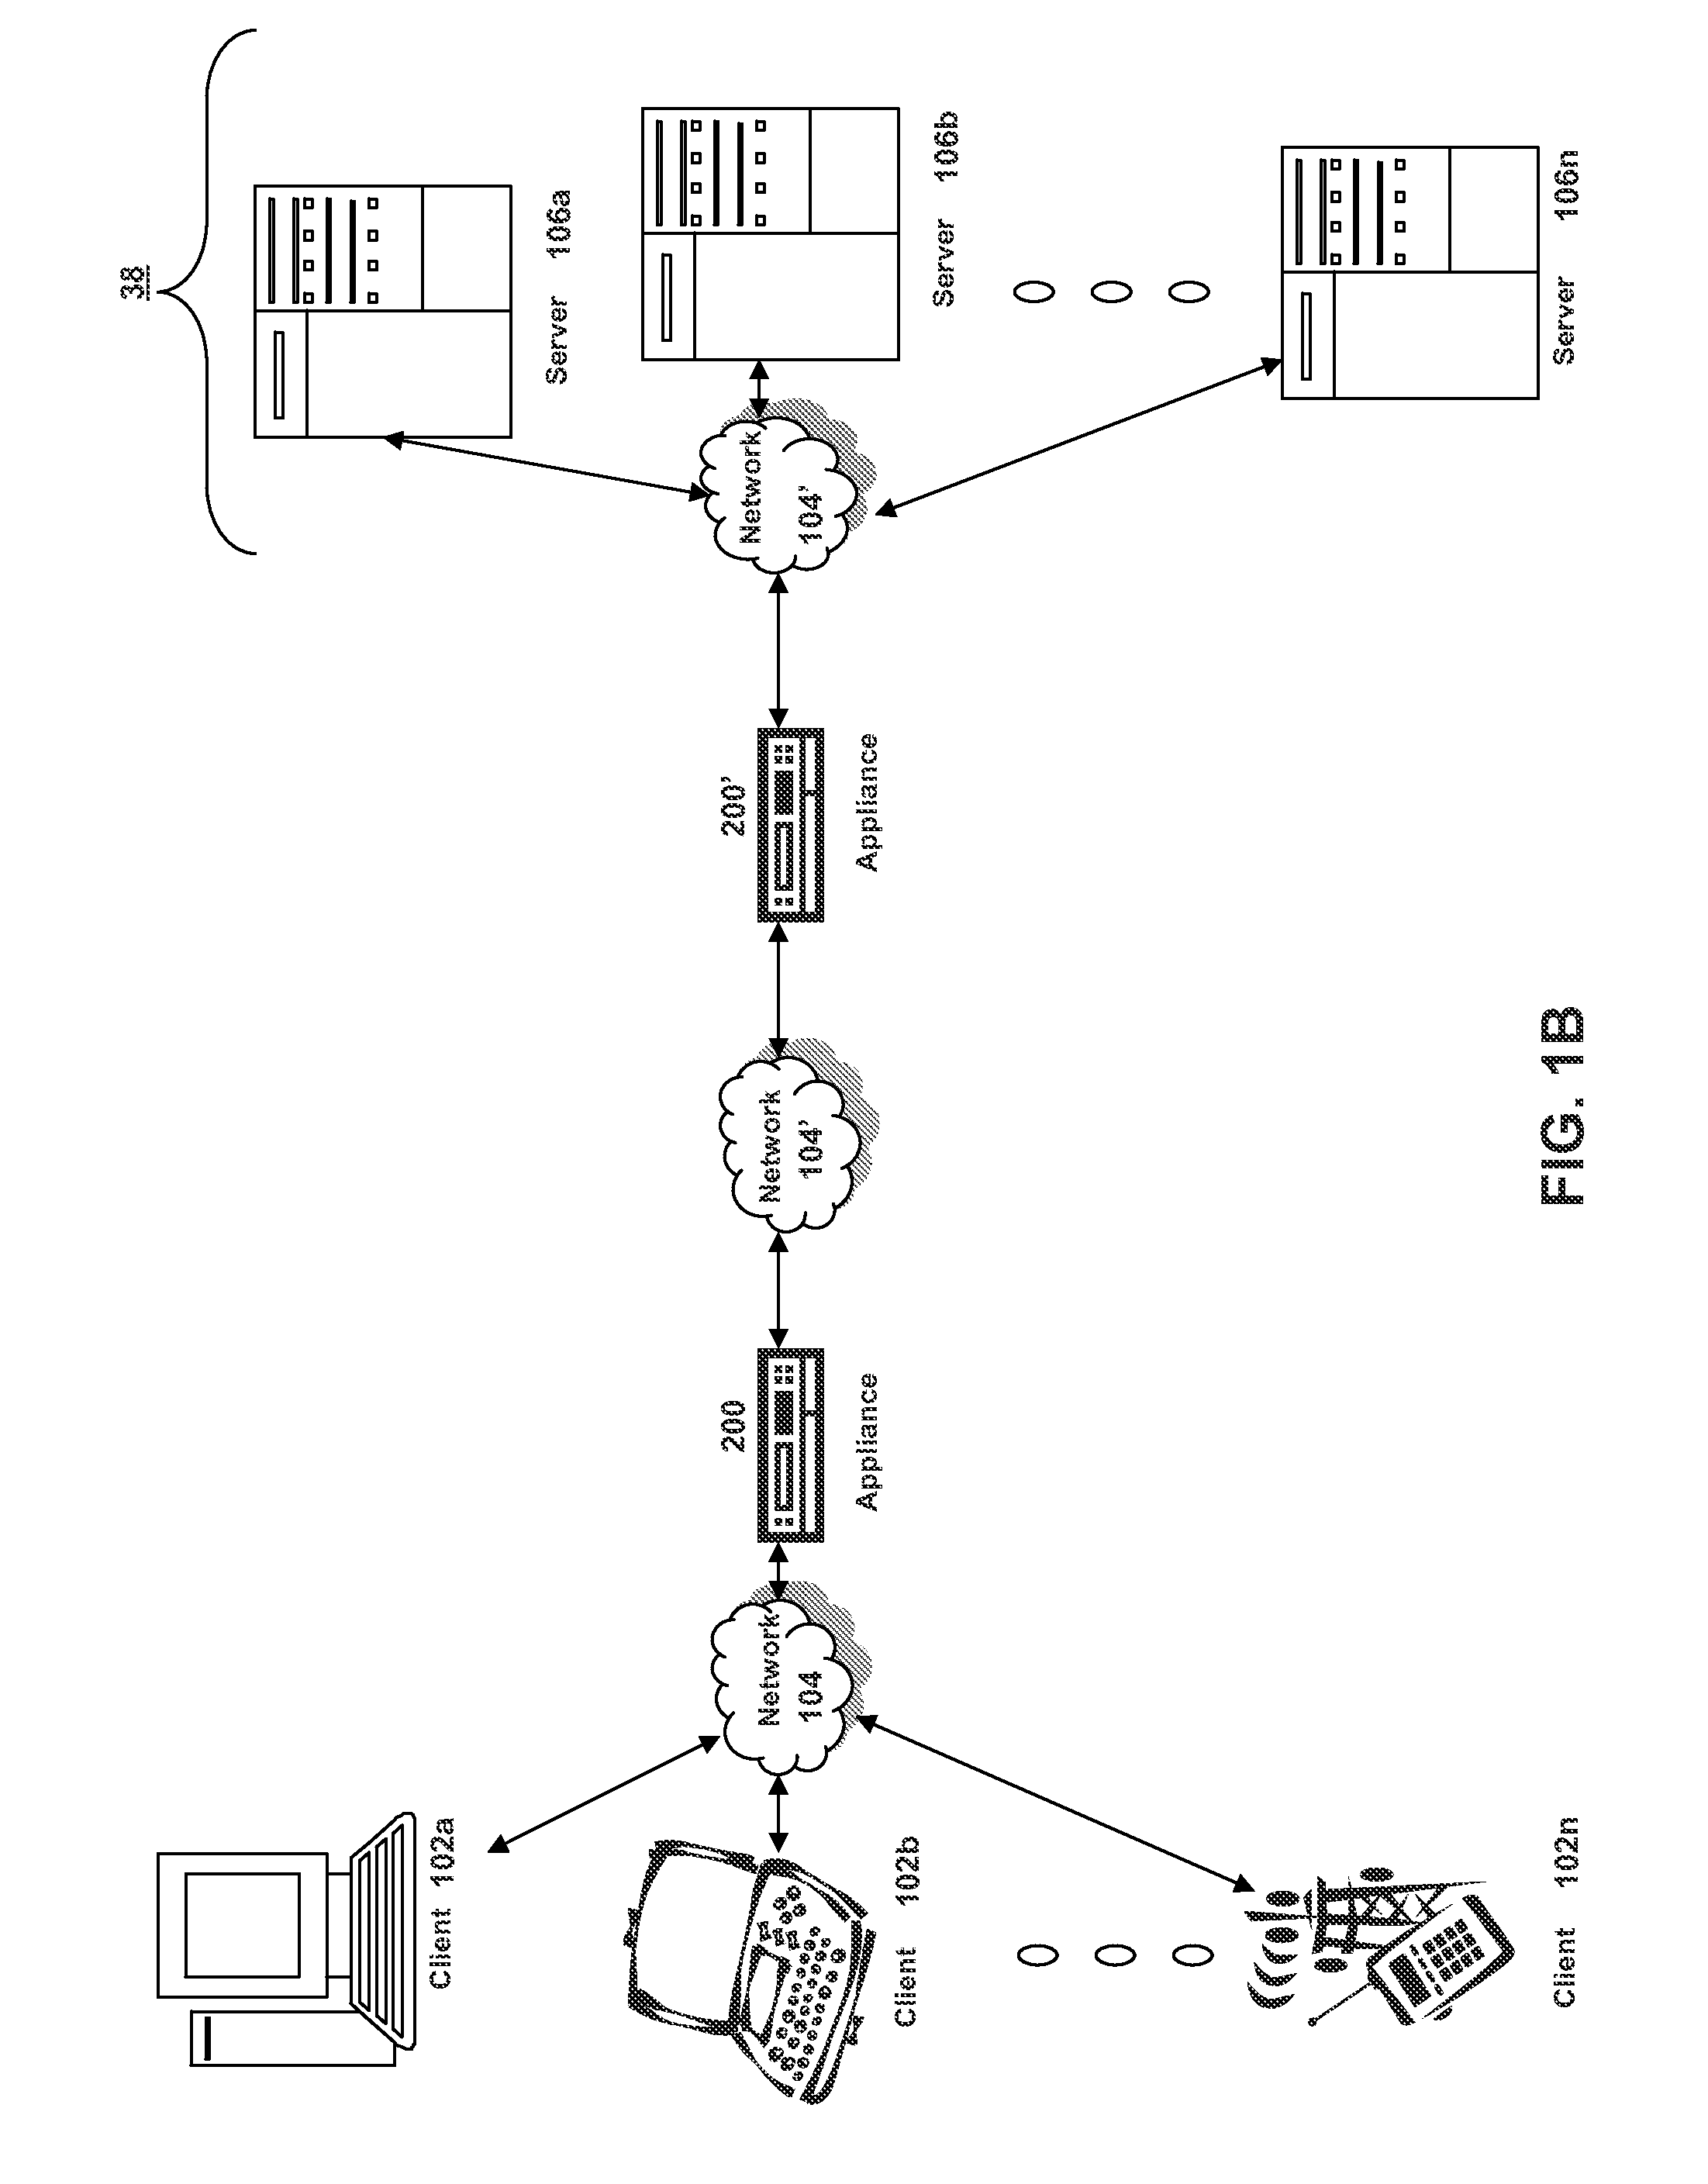 Systems and methods for dynamically expanding load balancing pool